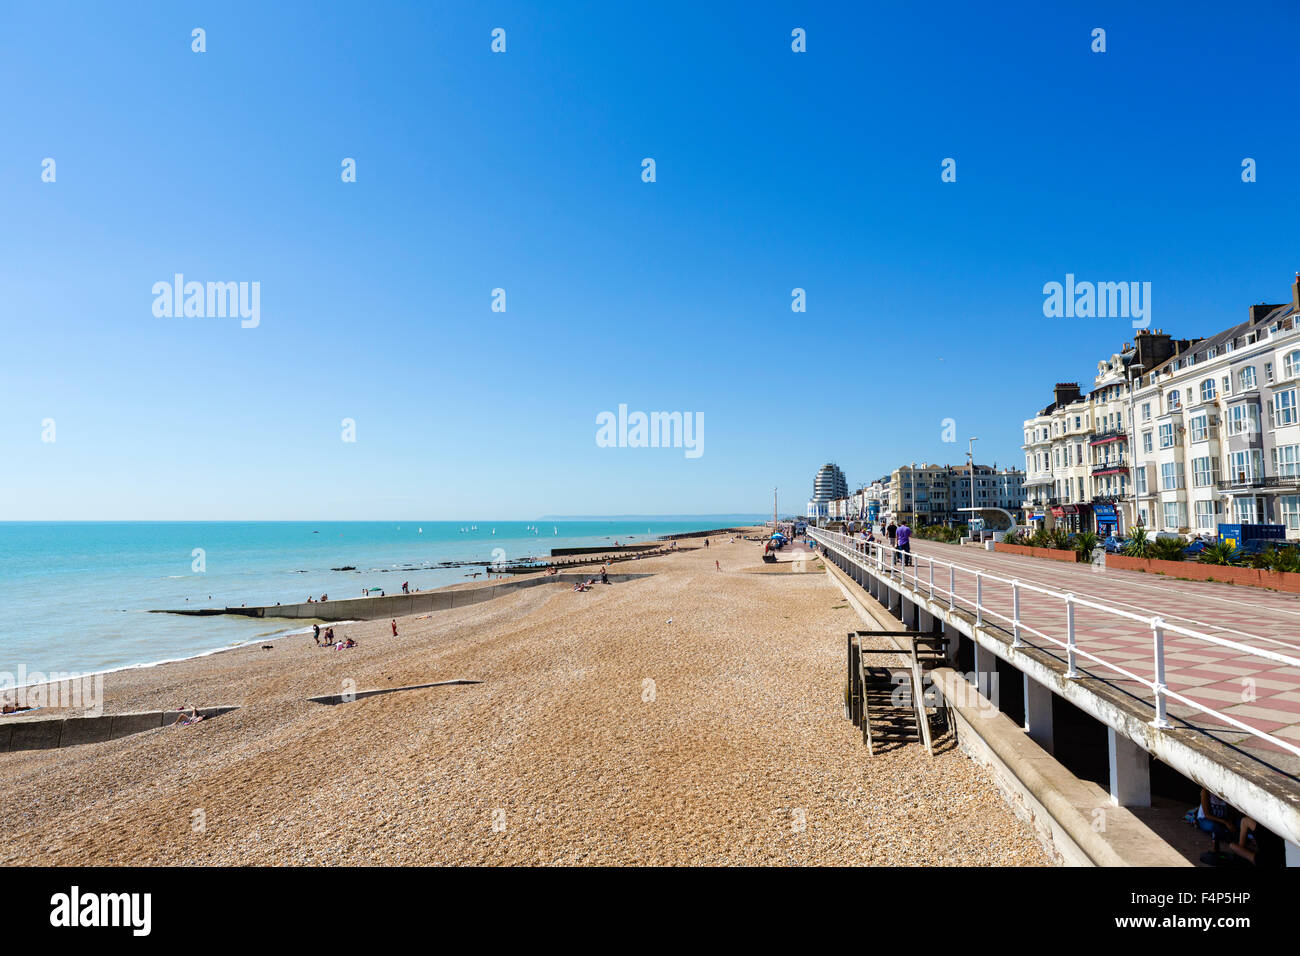 The beach and seafront promenade, Hastings, East Sussex, England, UK Stock Photo